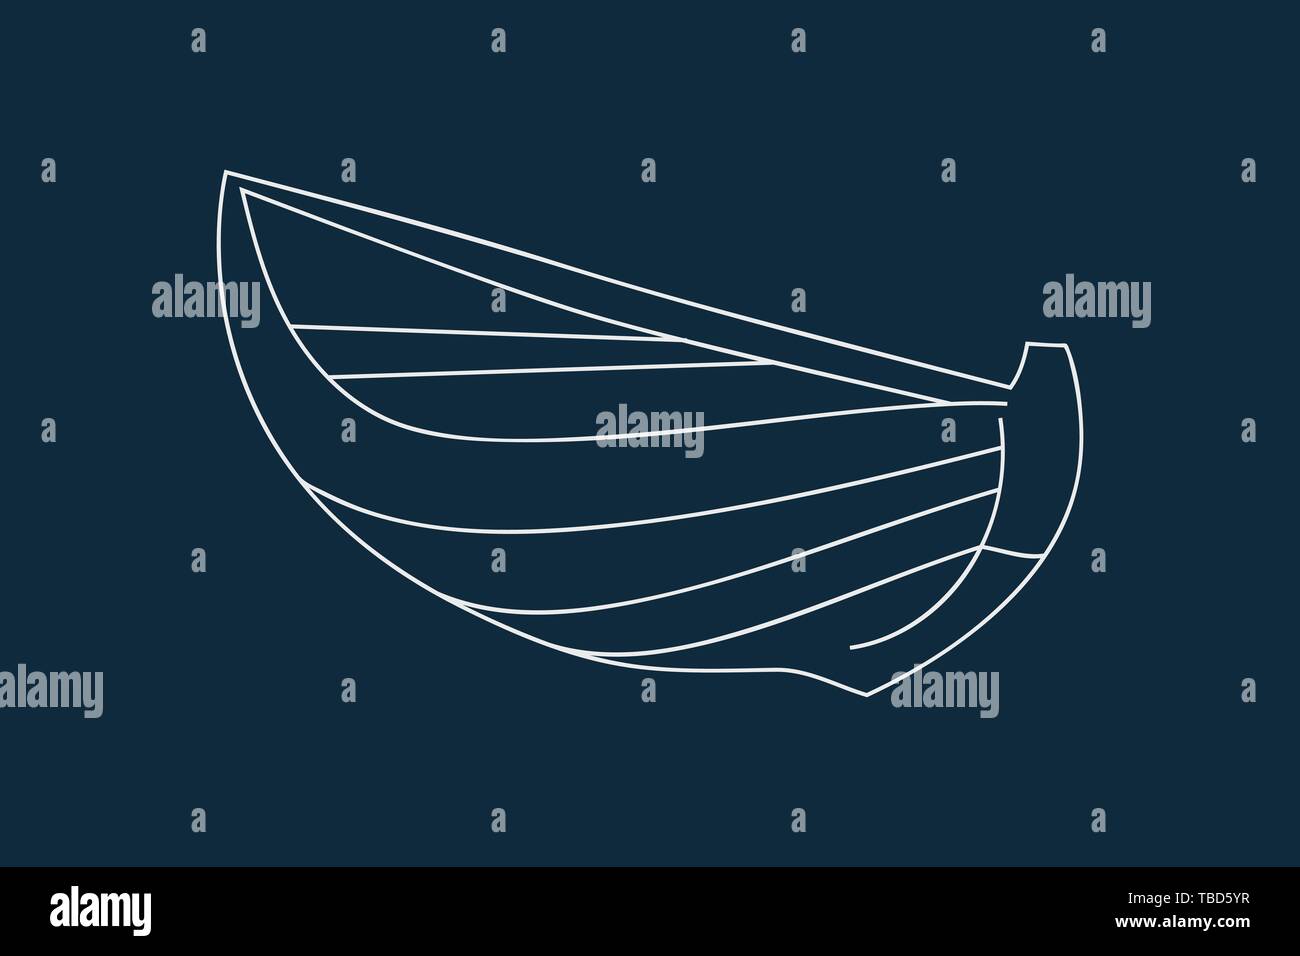 Line drawing vector of a wooden boat on blue Stock Vector